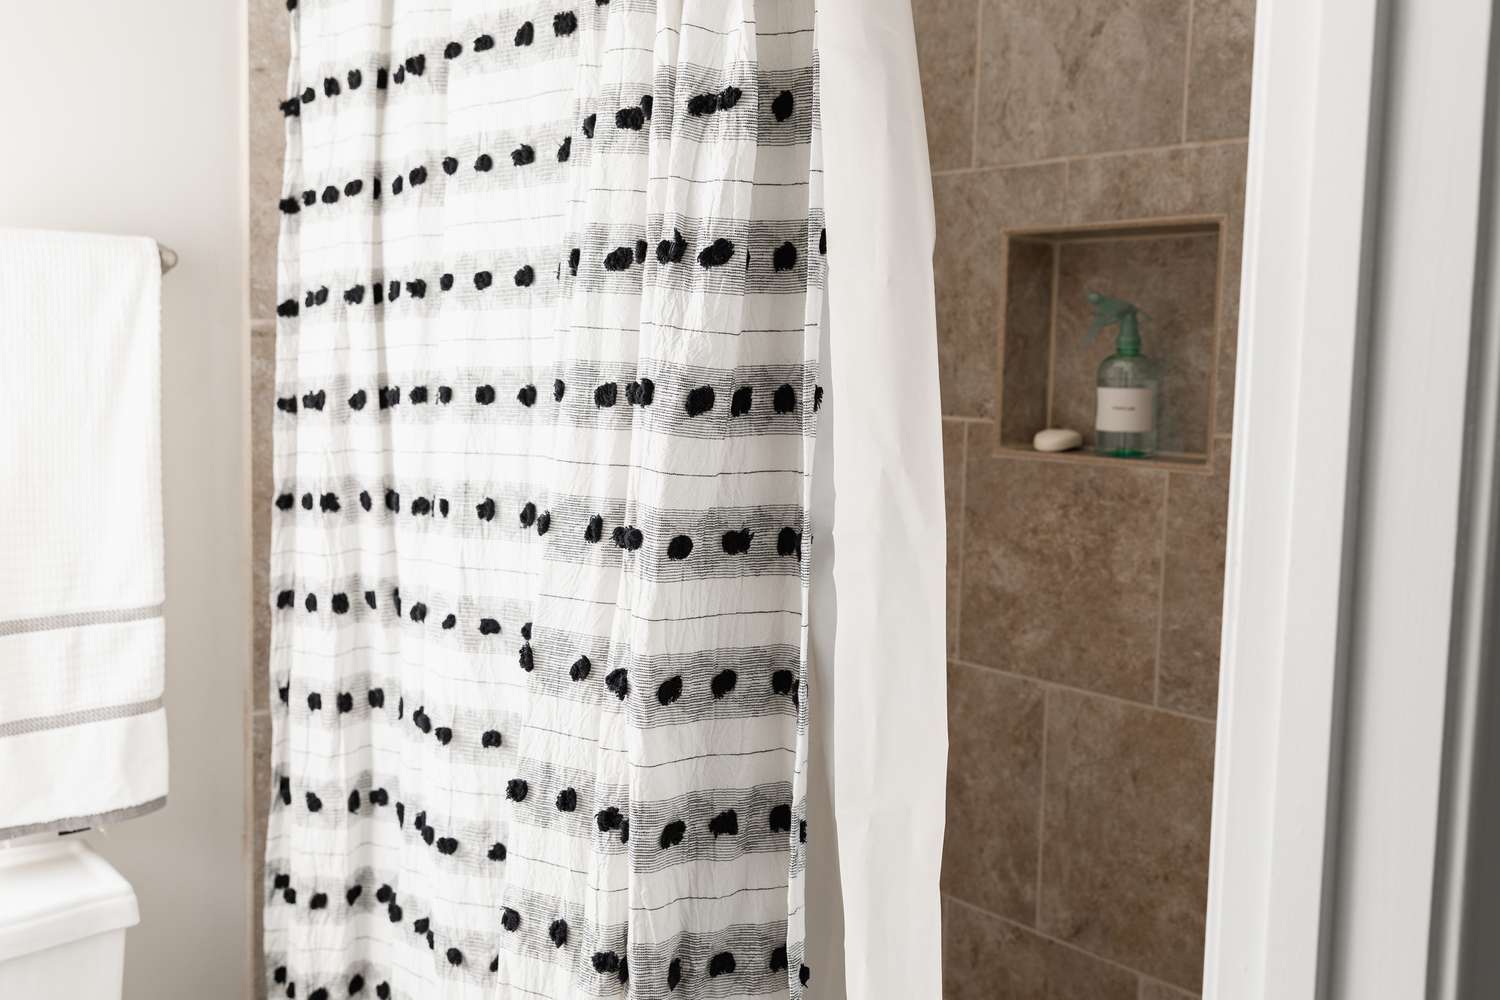 Using vinegar to clean soap scum on a shower curtain